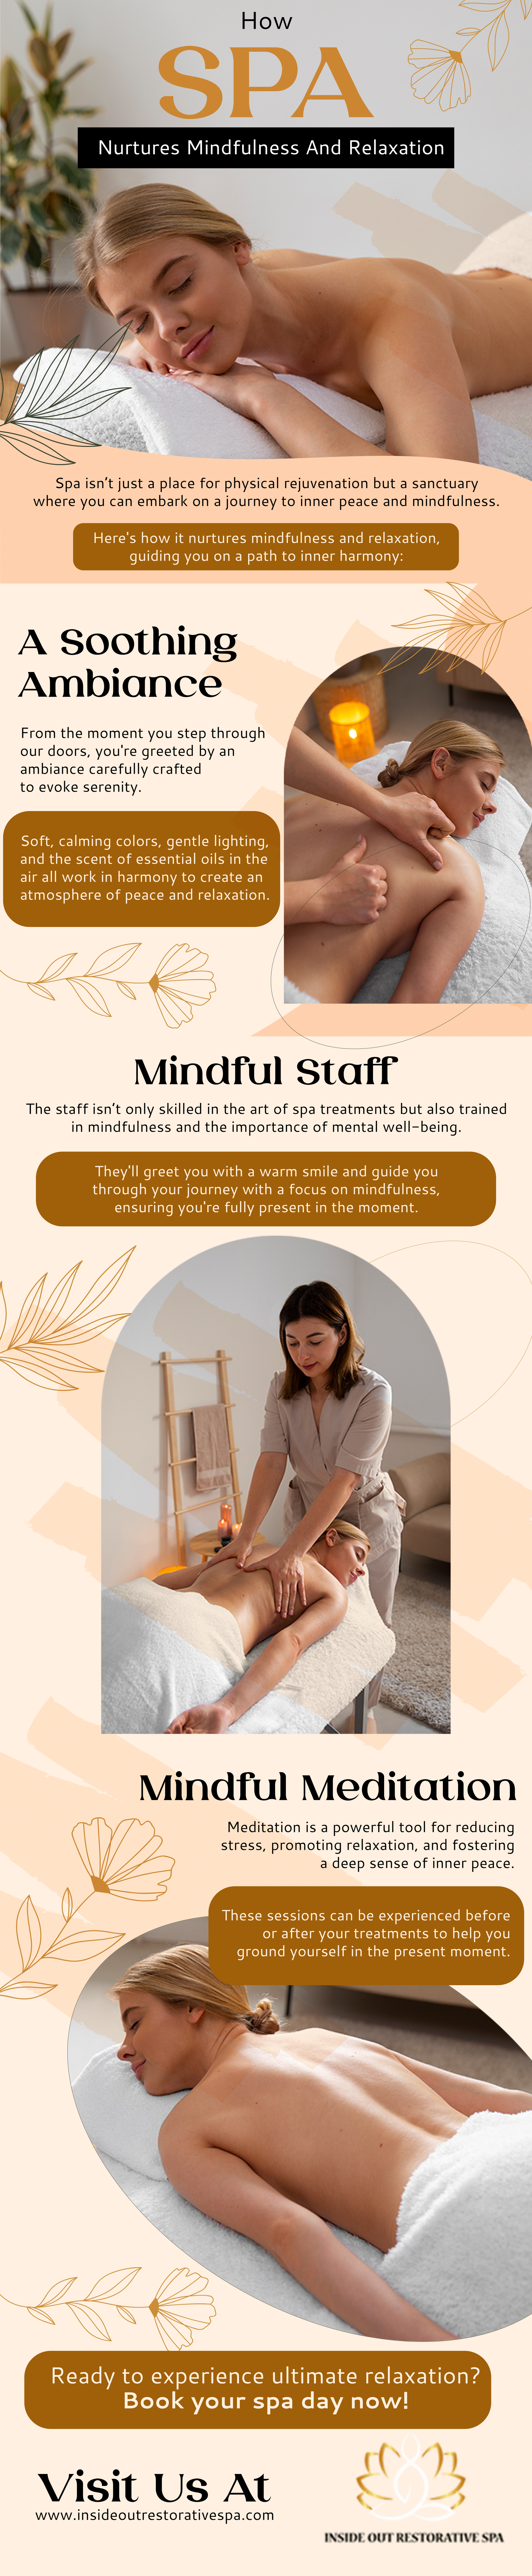 How Spa Nurtures Mindfulness And Relaxation - Infograph